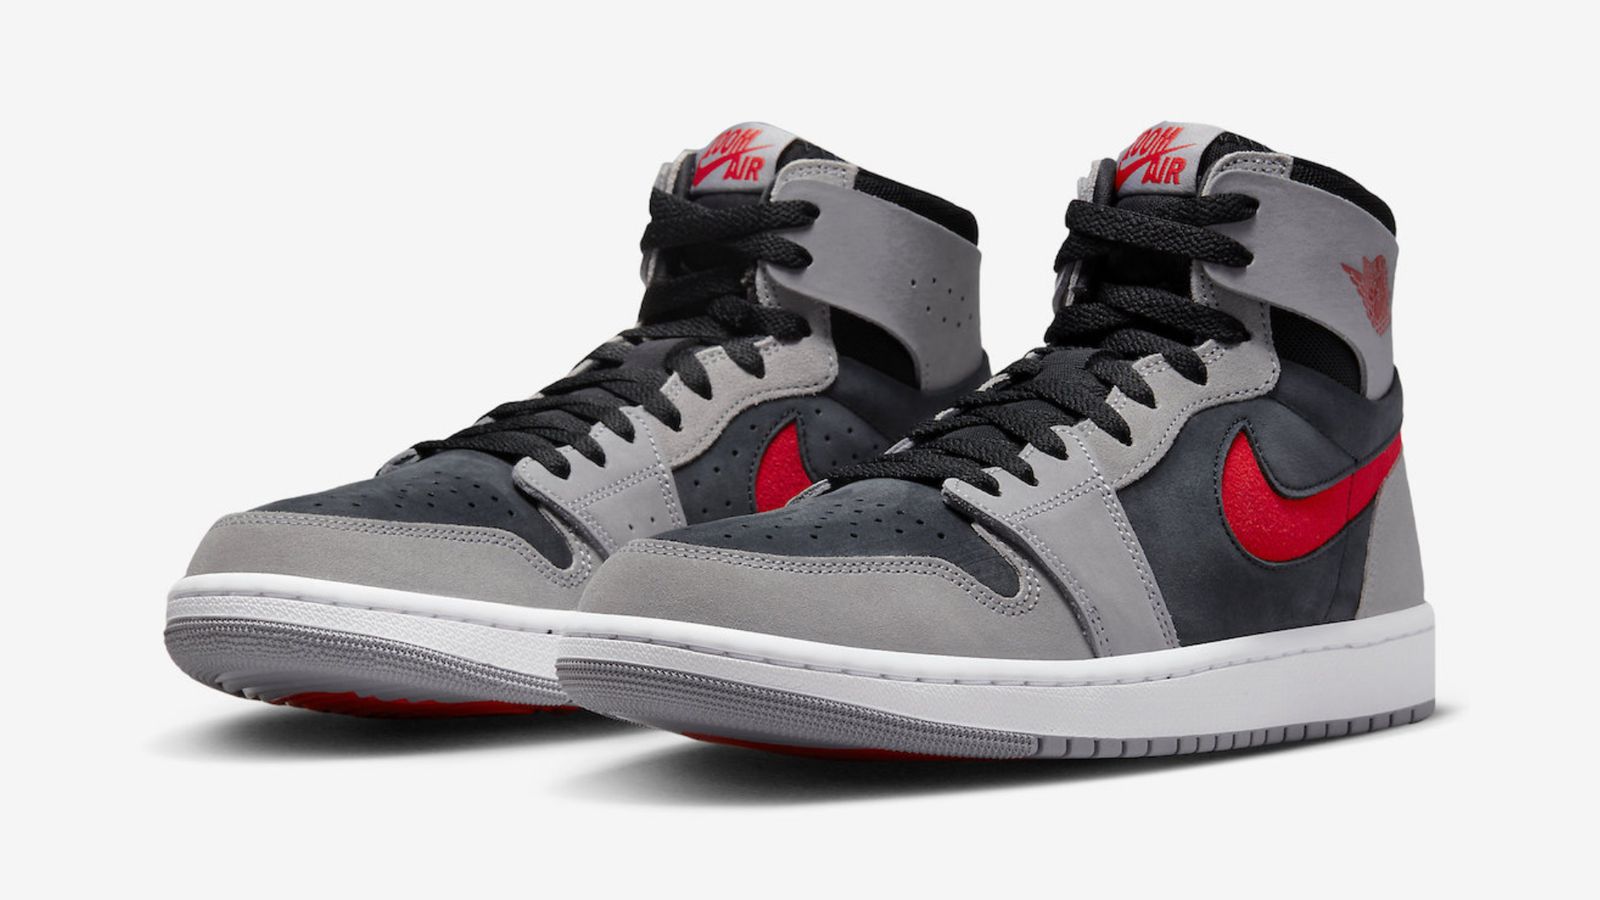 Air Jordan 1 High Zoom CMFT 2 "Fire Red" product image of a black and grey pair of sneakers with red details.